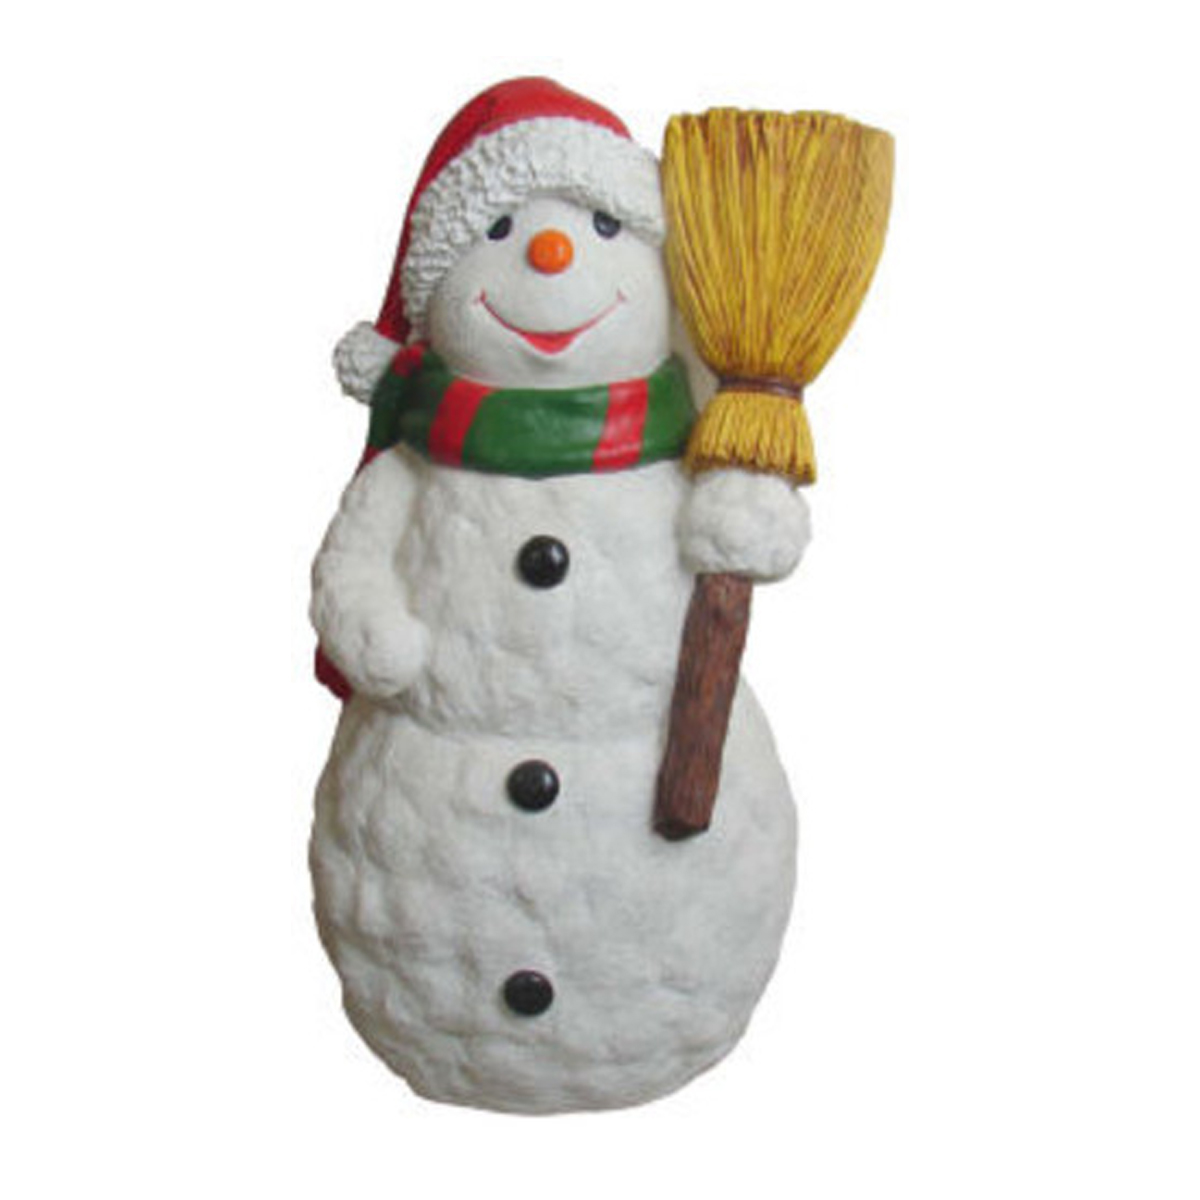 Snowman with Scarf, Santa Hat, and Broom - 4ft Tall